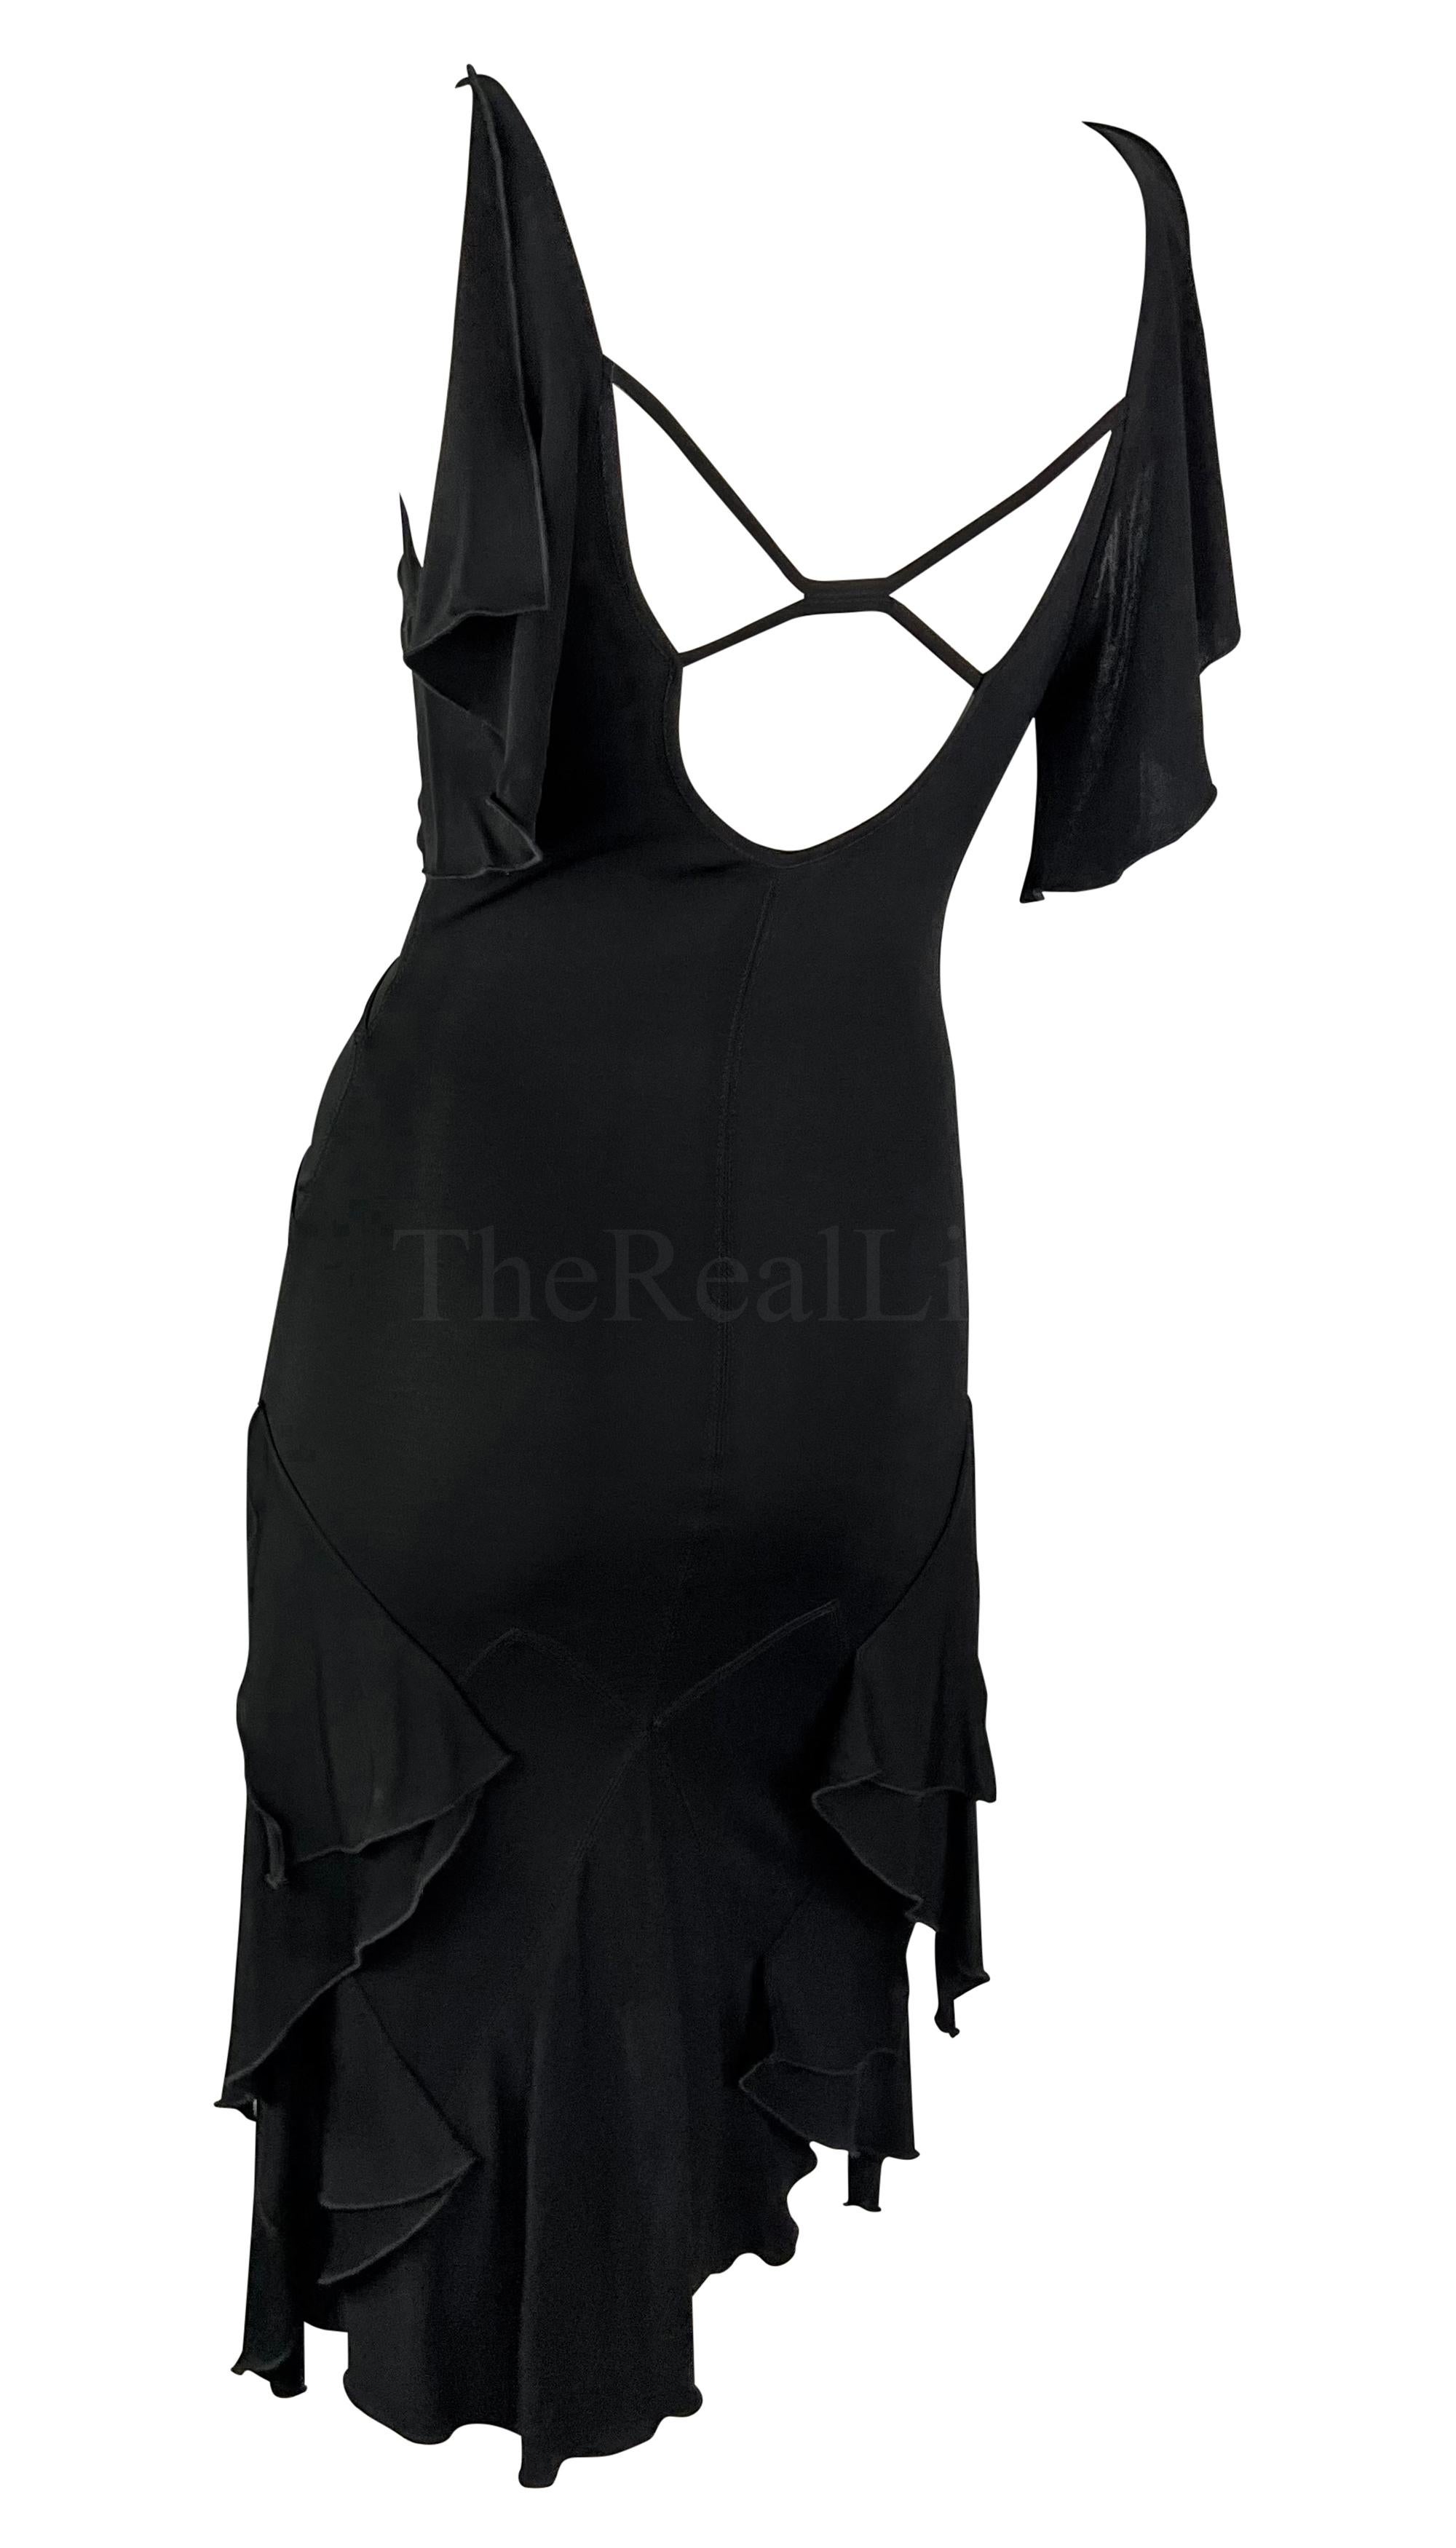 Women's 2003 Gucci by Tom Ford Black Plunge Ruffle Dress Sleeveless For Sale